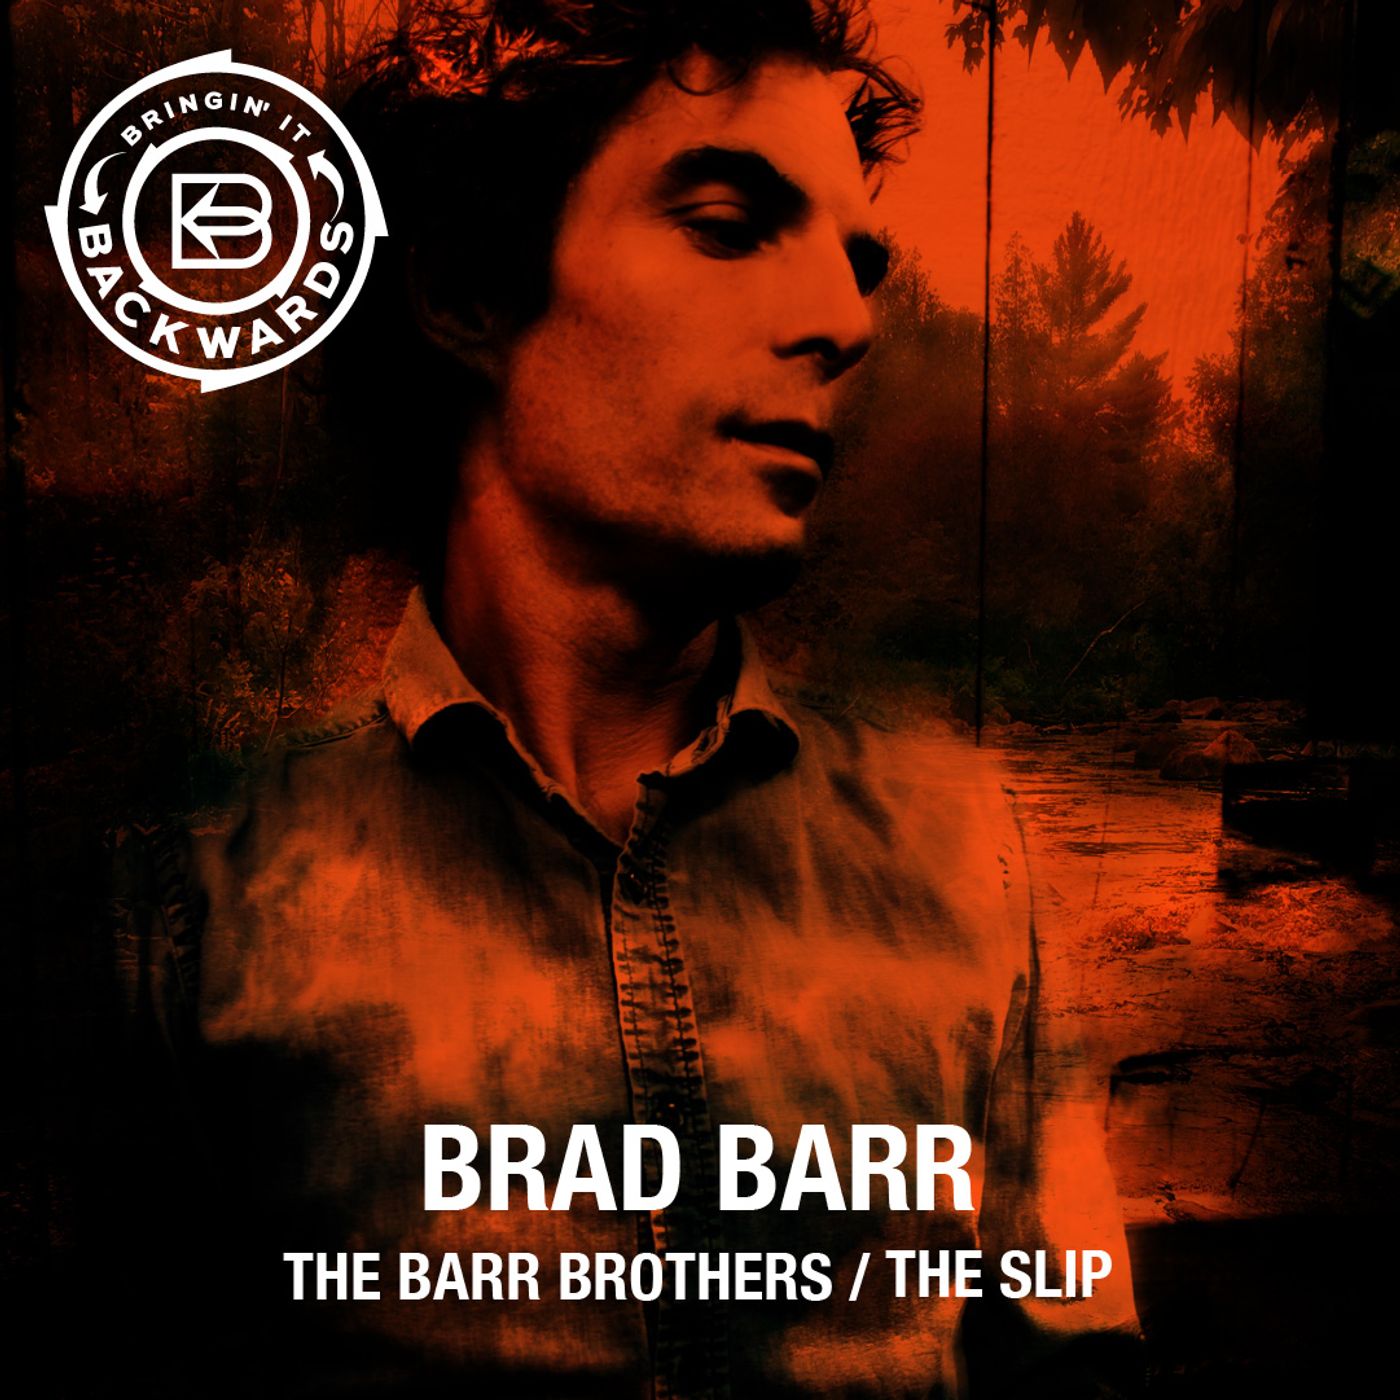 Interview with Brad Barr Image